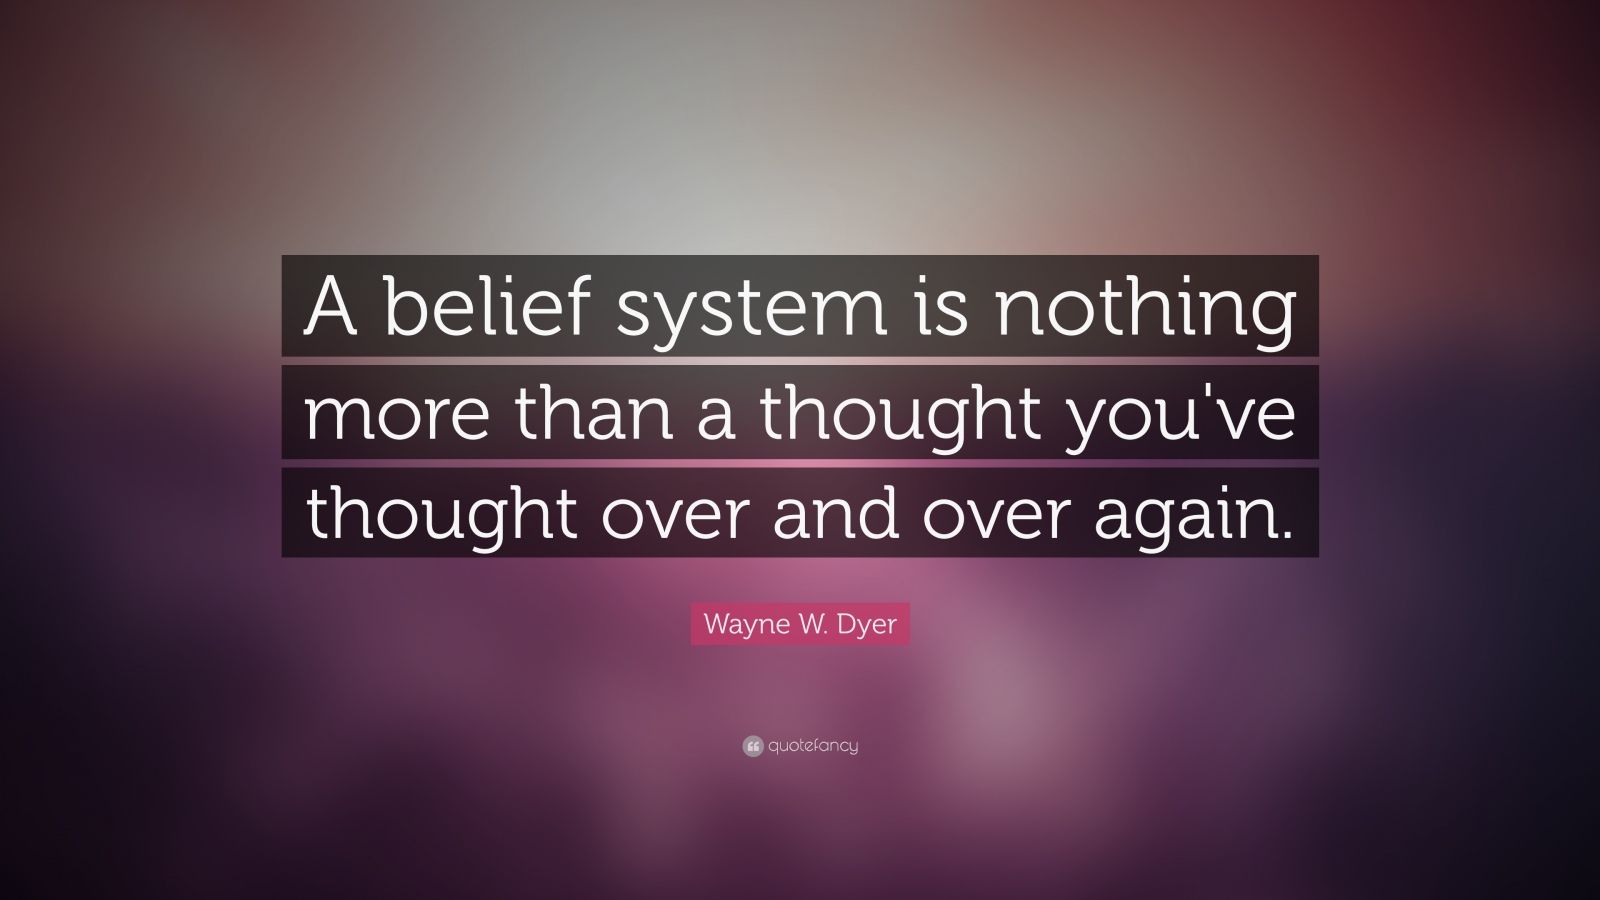 Wayne W. Dyer Quote: “A belief system is nothing more than a thought